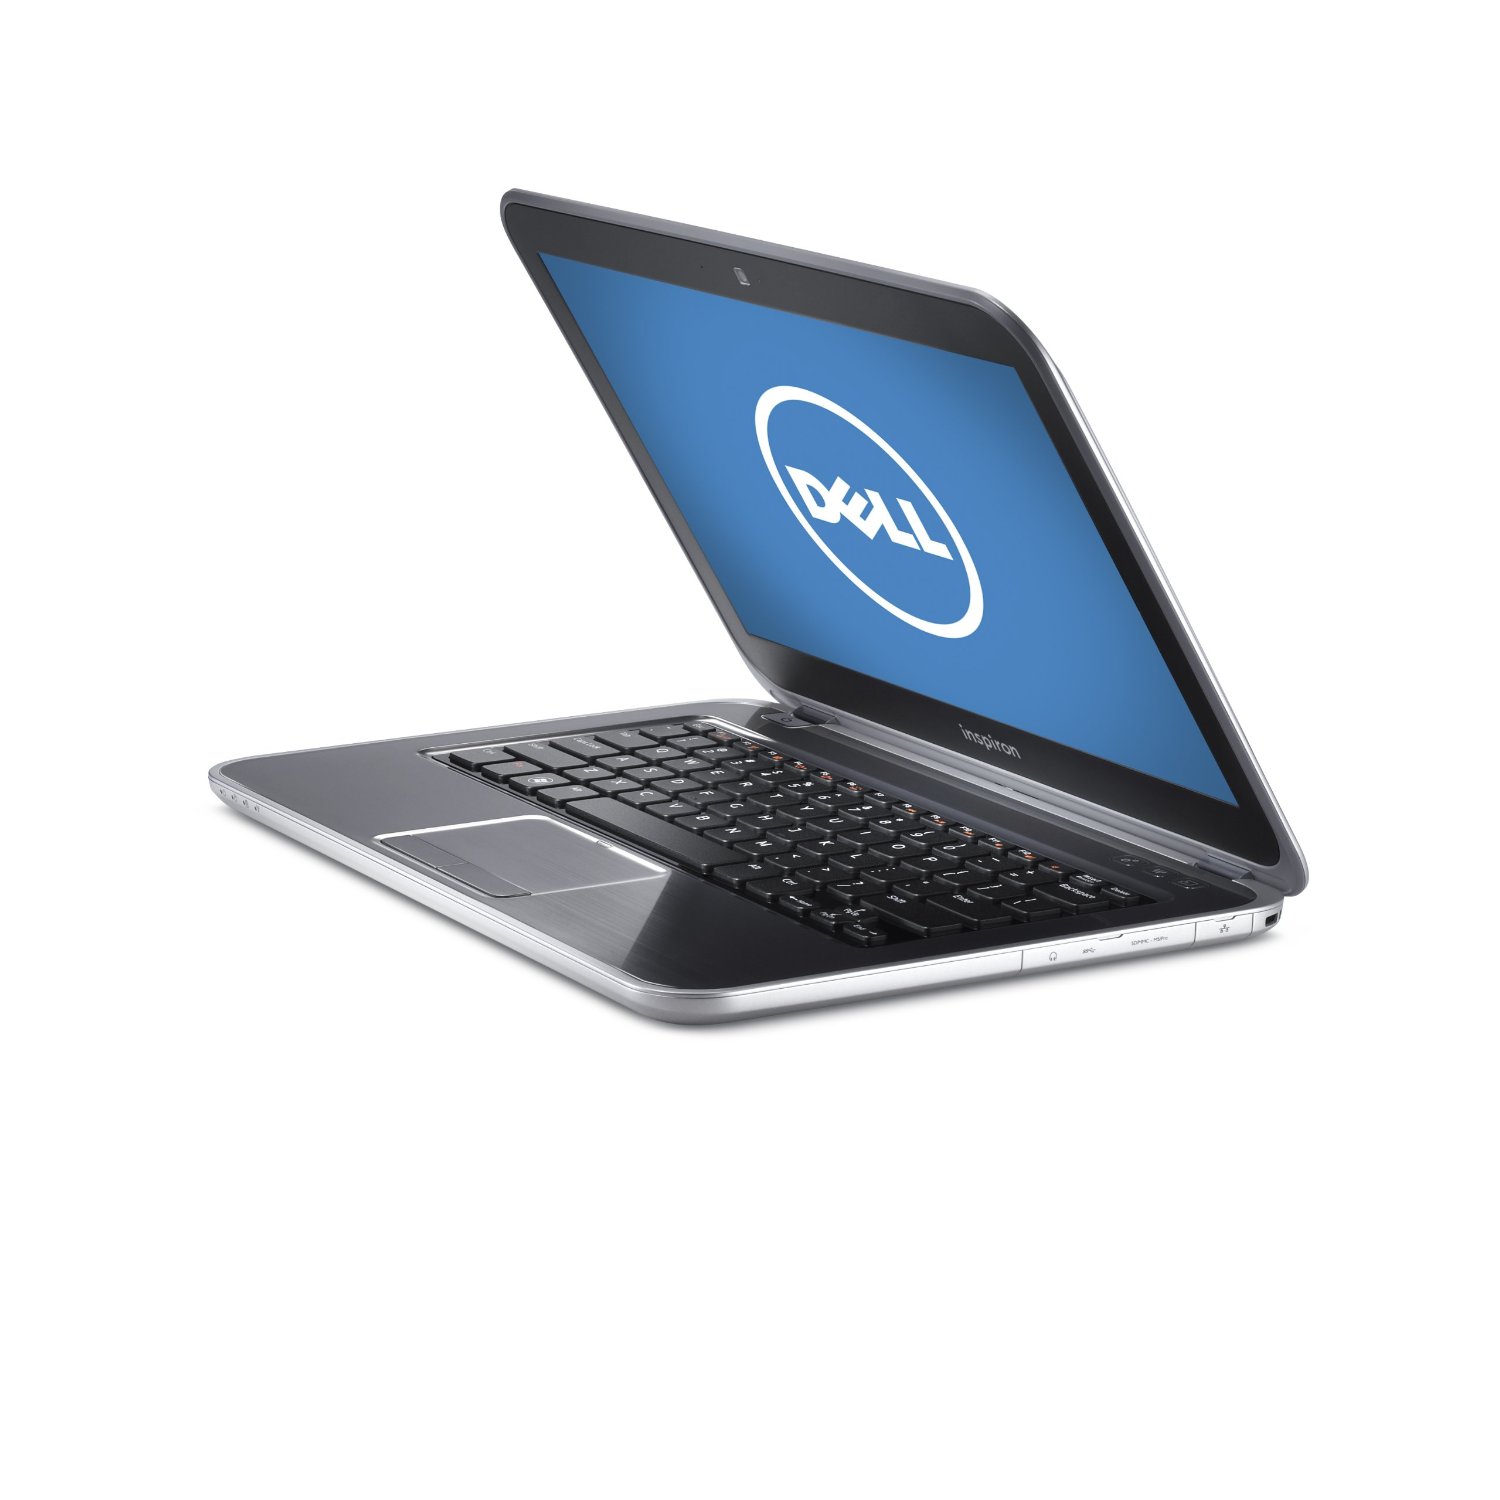 http://thetechjournal.com/wp-content/uploads/images/1210/1349897573-dell-inspiron-13z-13inch-laptop-3.jpg